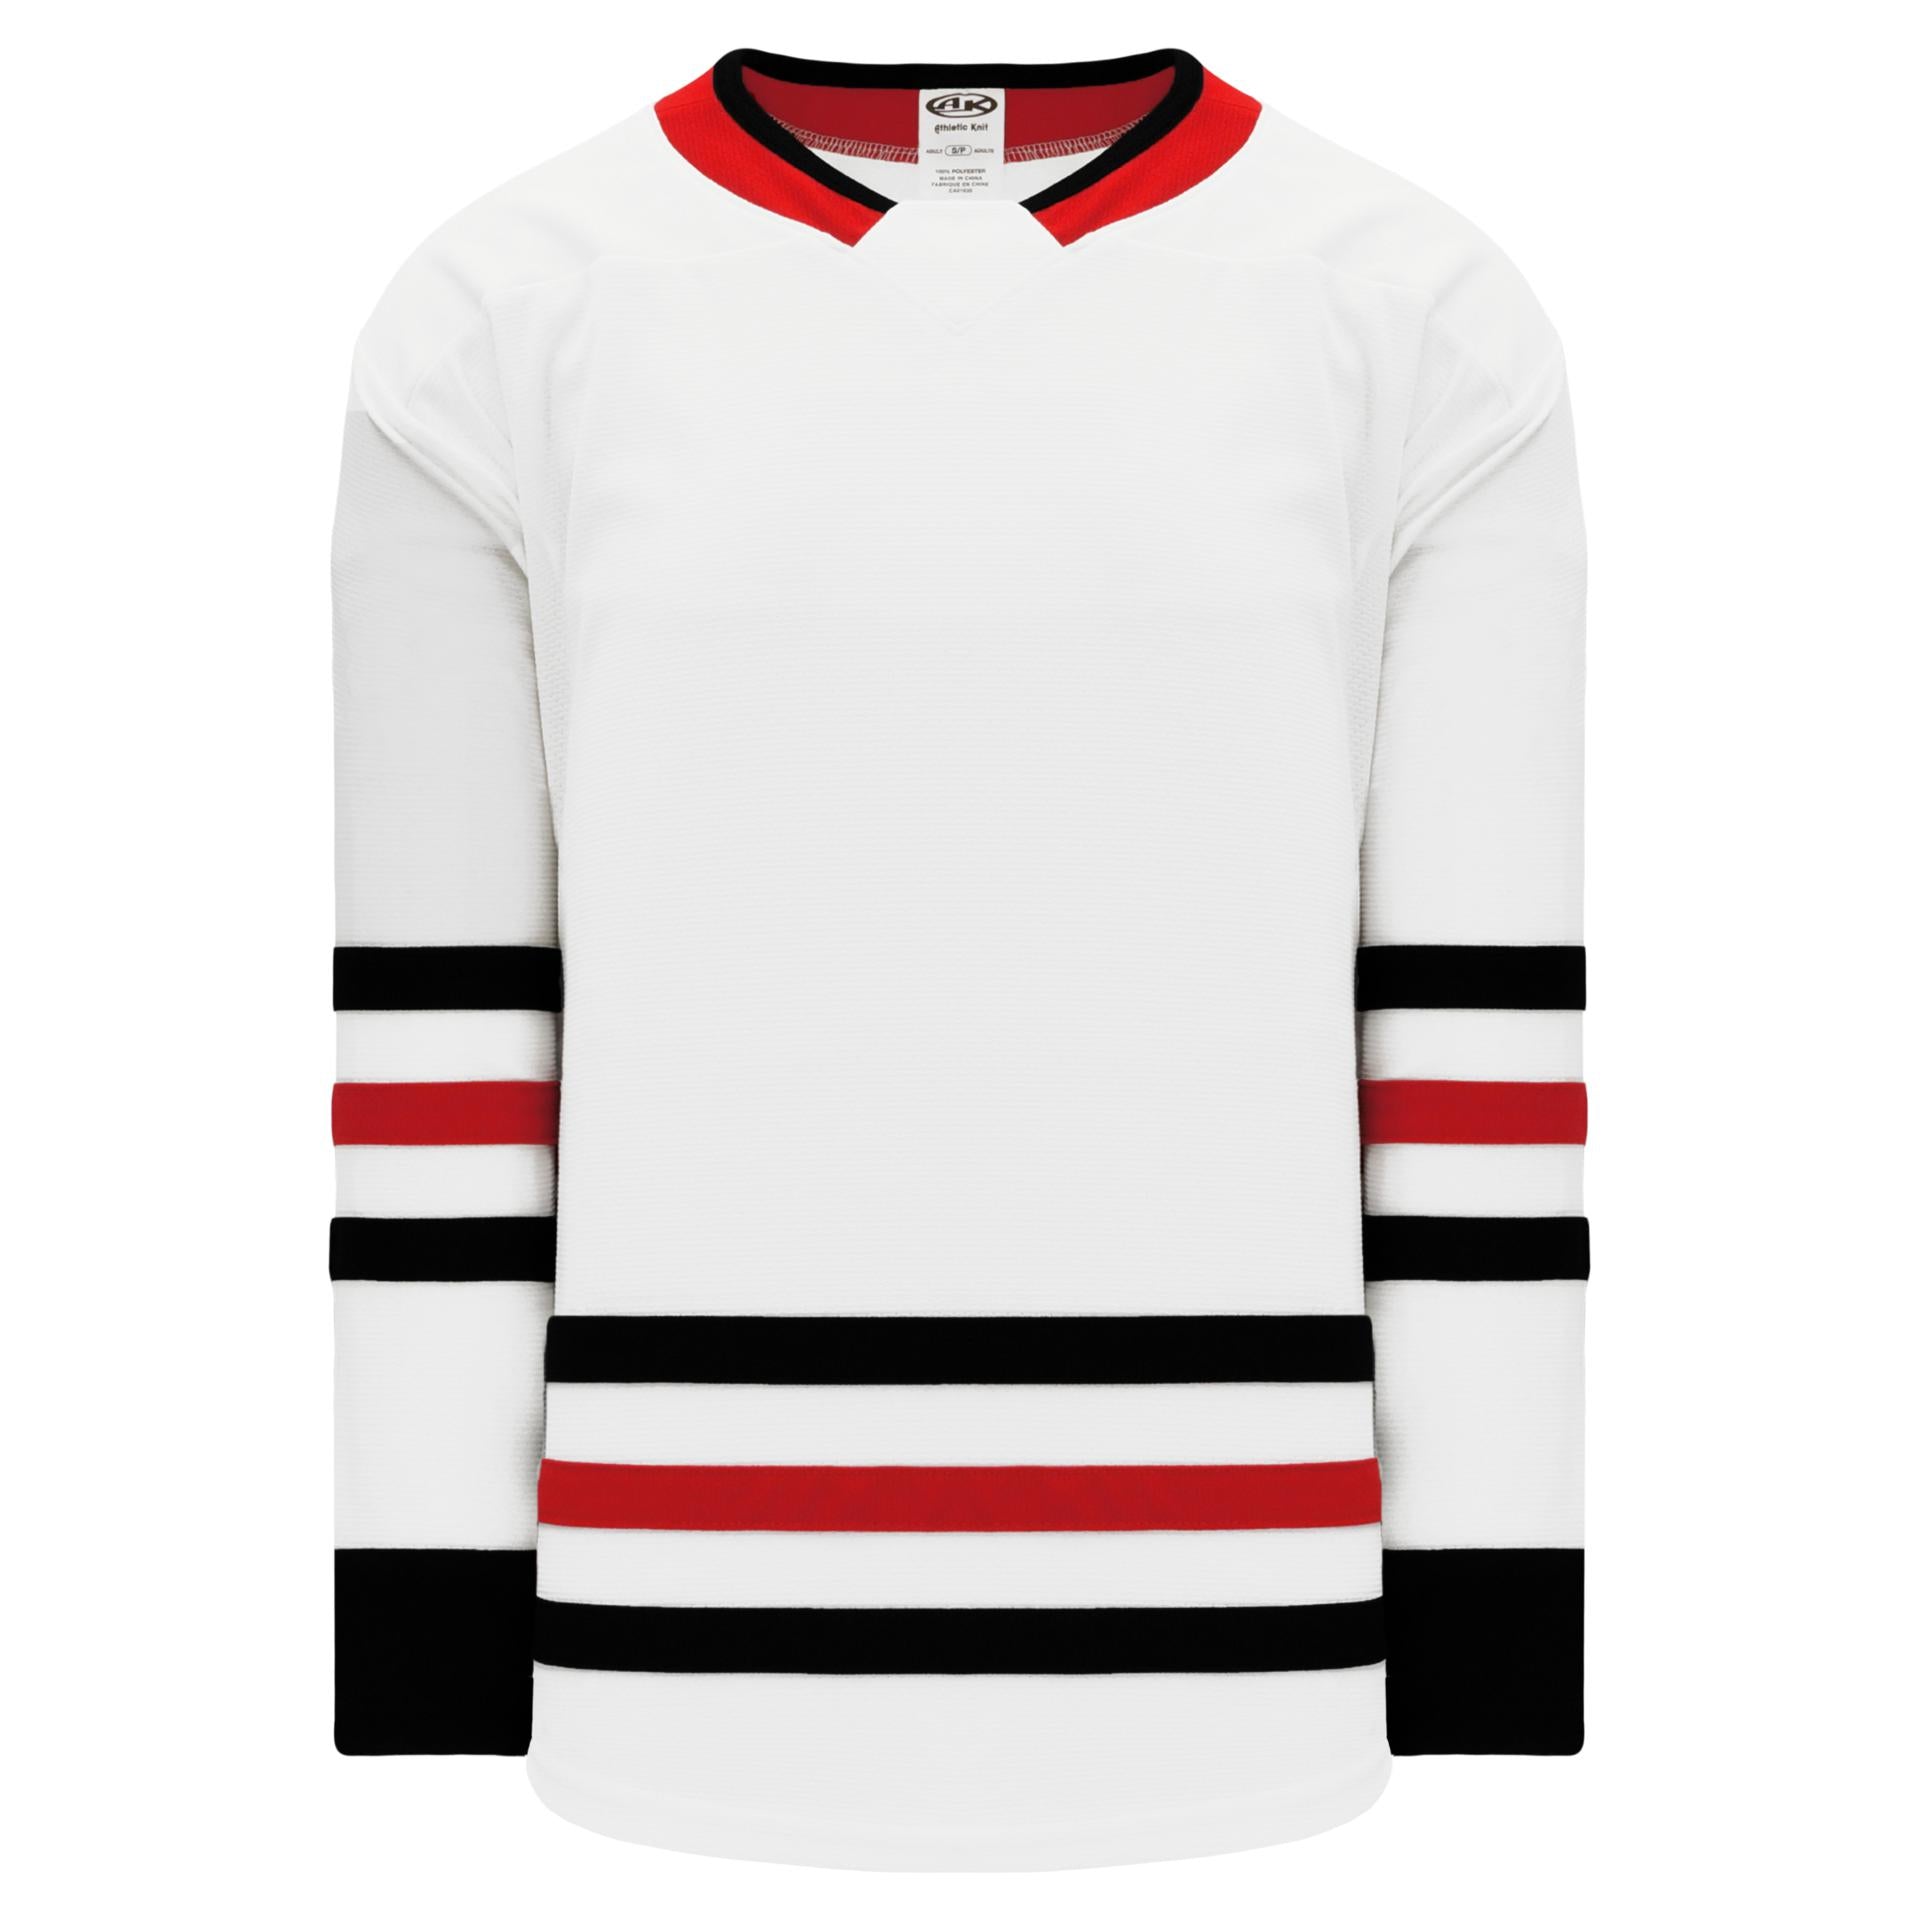 Blackhawks Store on X: ICYMI: Blackhawks #WinterClassic practice jerseys  are available now at the #BlackhawksStore, @MadhouseStoreUC and  #HockeyHouse! The practice jerseys are blank ($130) and it's an additional  $60 for lettering. Stop